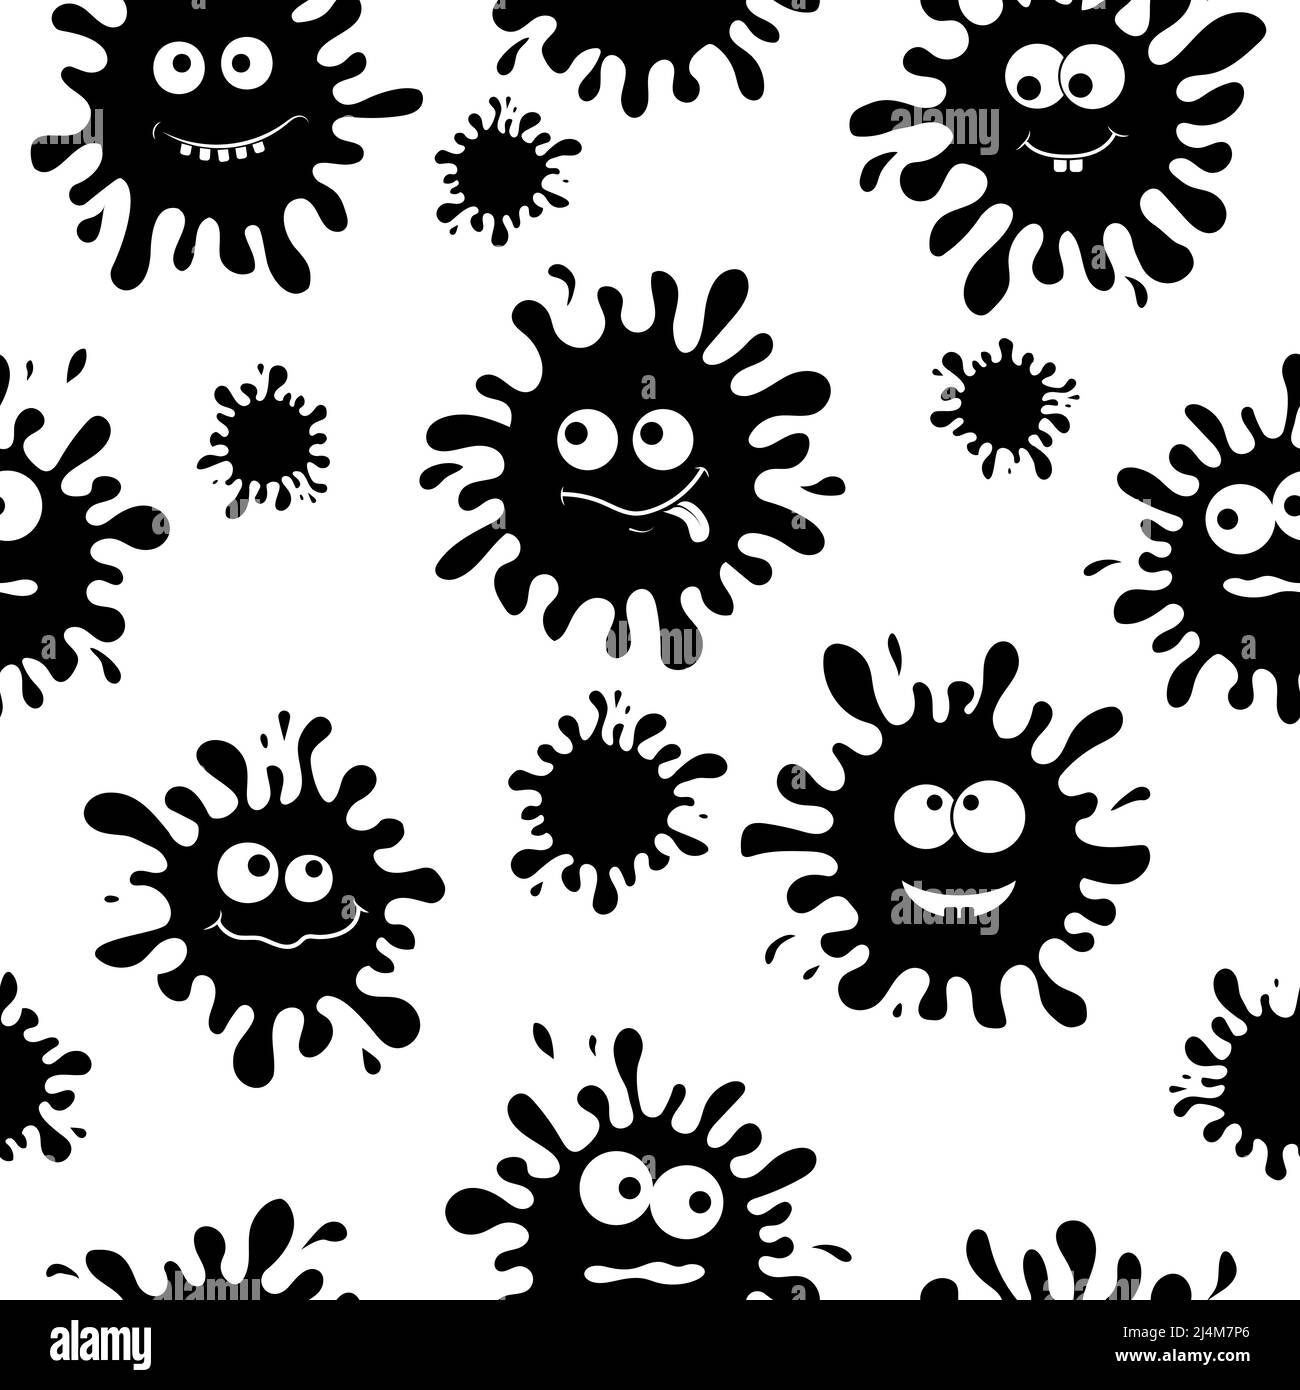 blob pattern character with emotion, isolated vector illustration Stock Vector